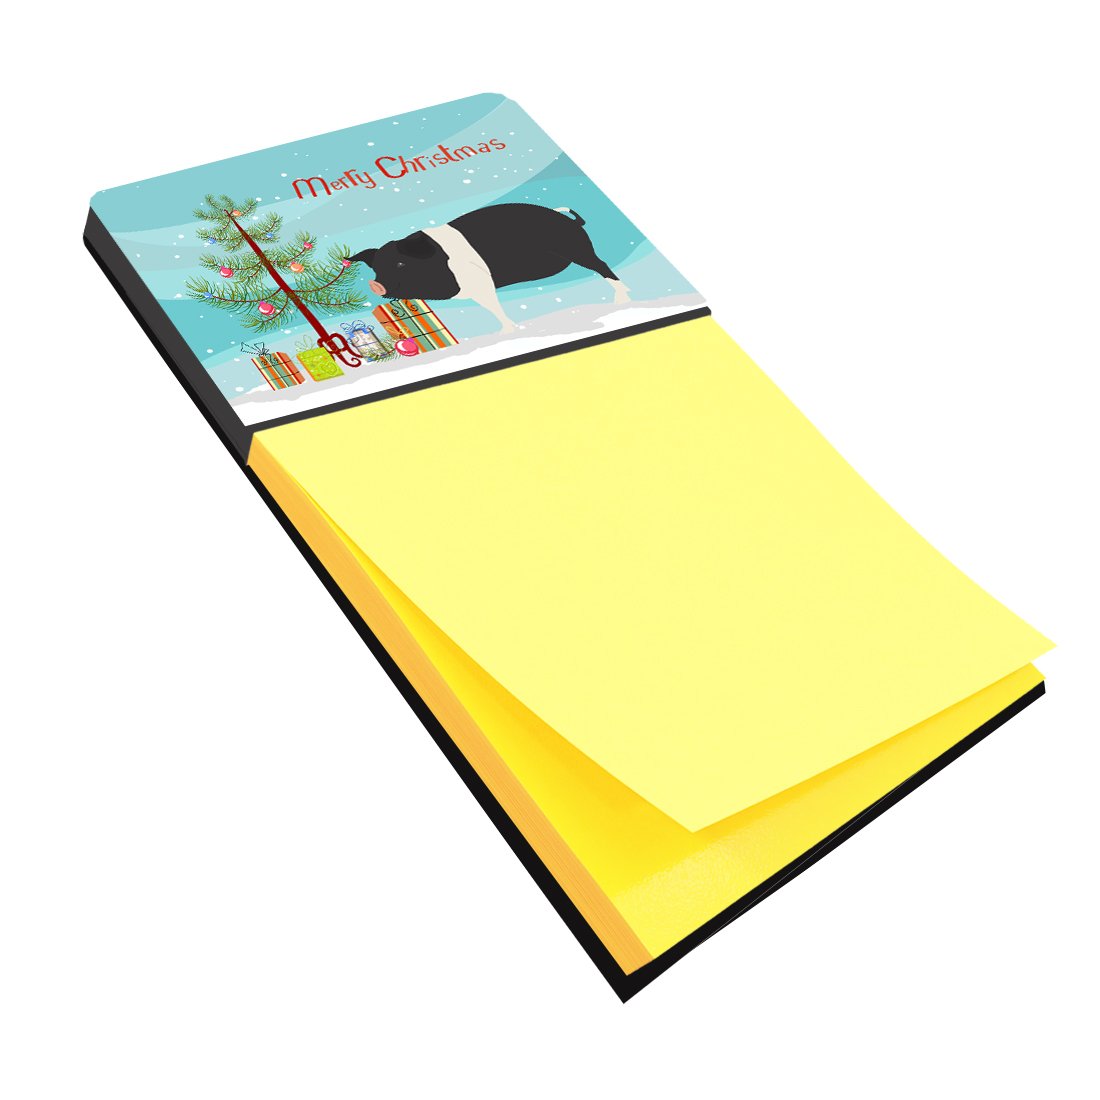 Hampshire Pig Christmas Sticky Note Holder BB9306SN by Caroline's Treasures